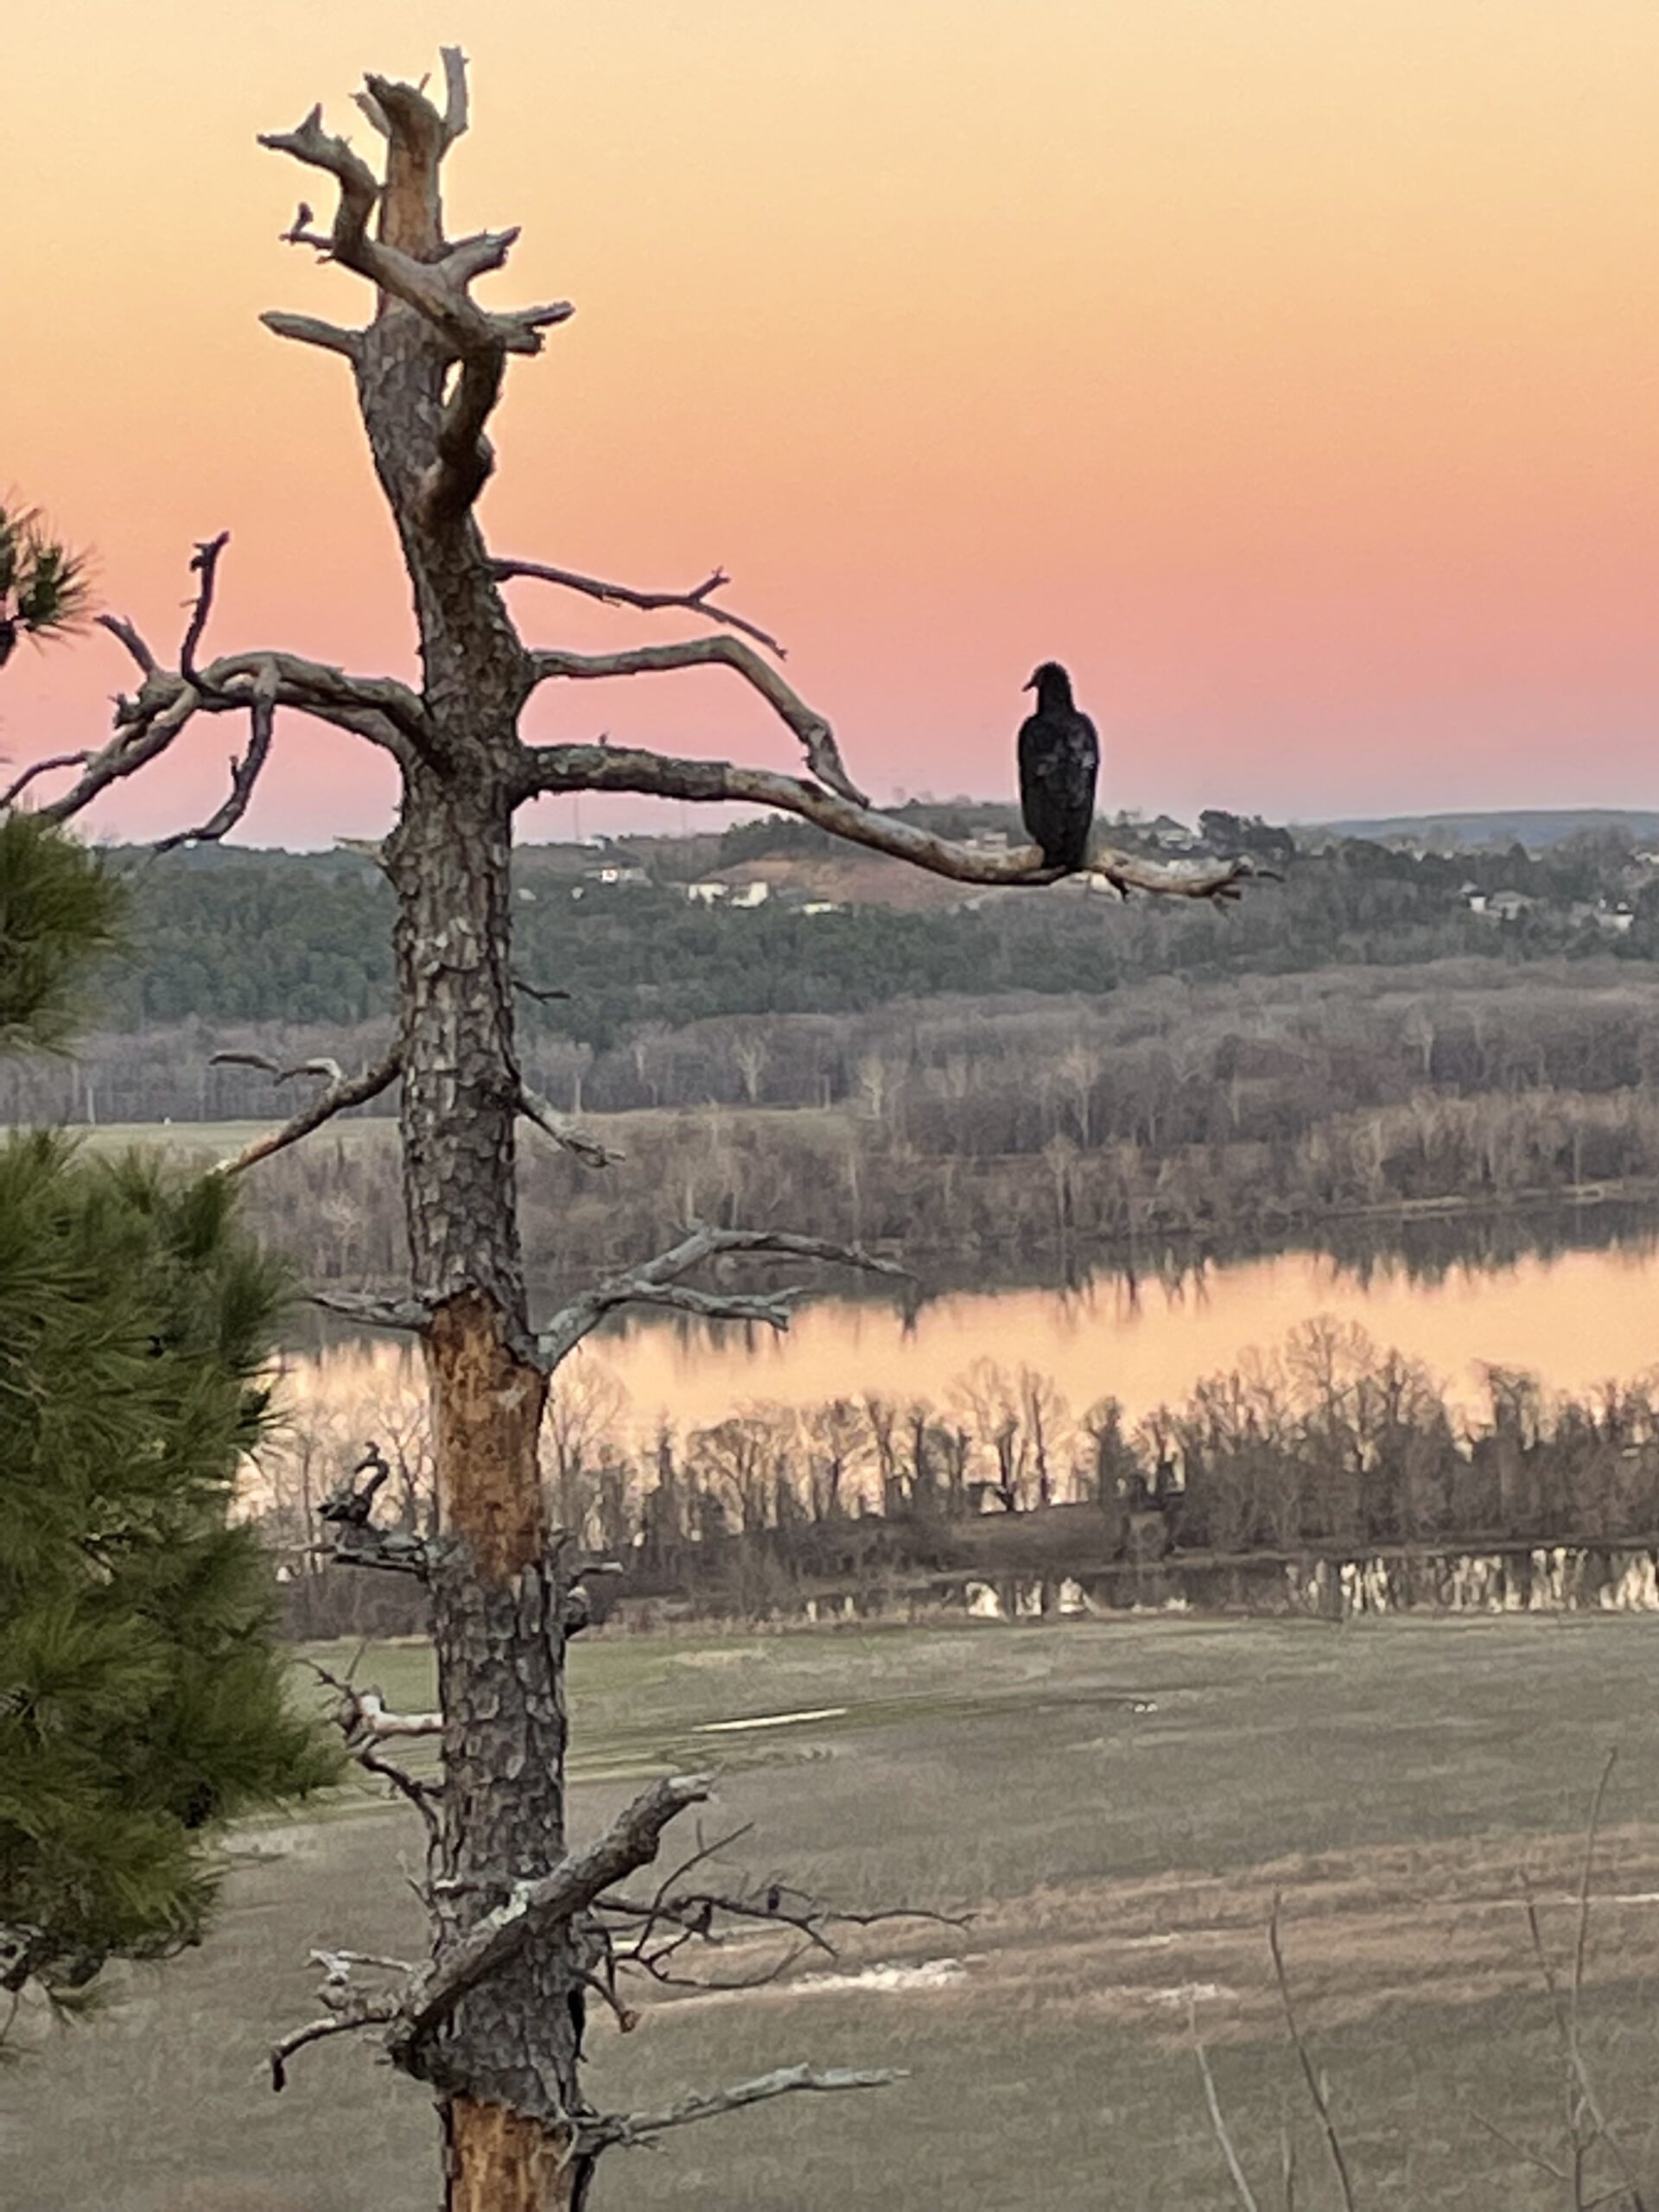 A large bird is silhouetted by a pink-ish orange sky as it sits on a brach of a dead tree. Beyond we can see a body of water that is orange from the sky and hills covered with trees in the background.